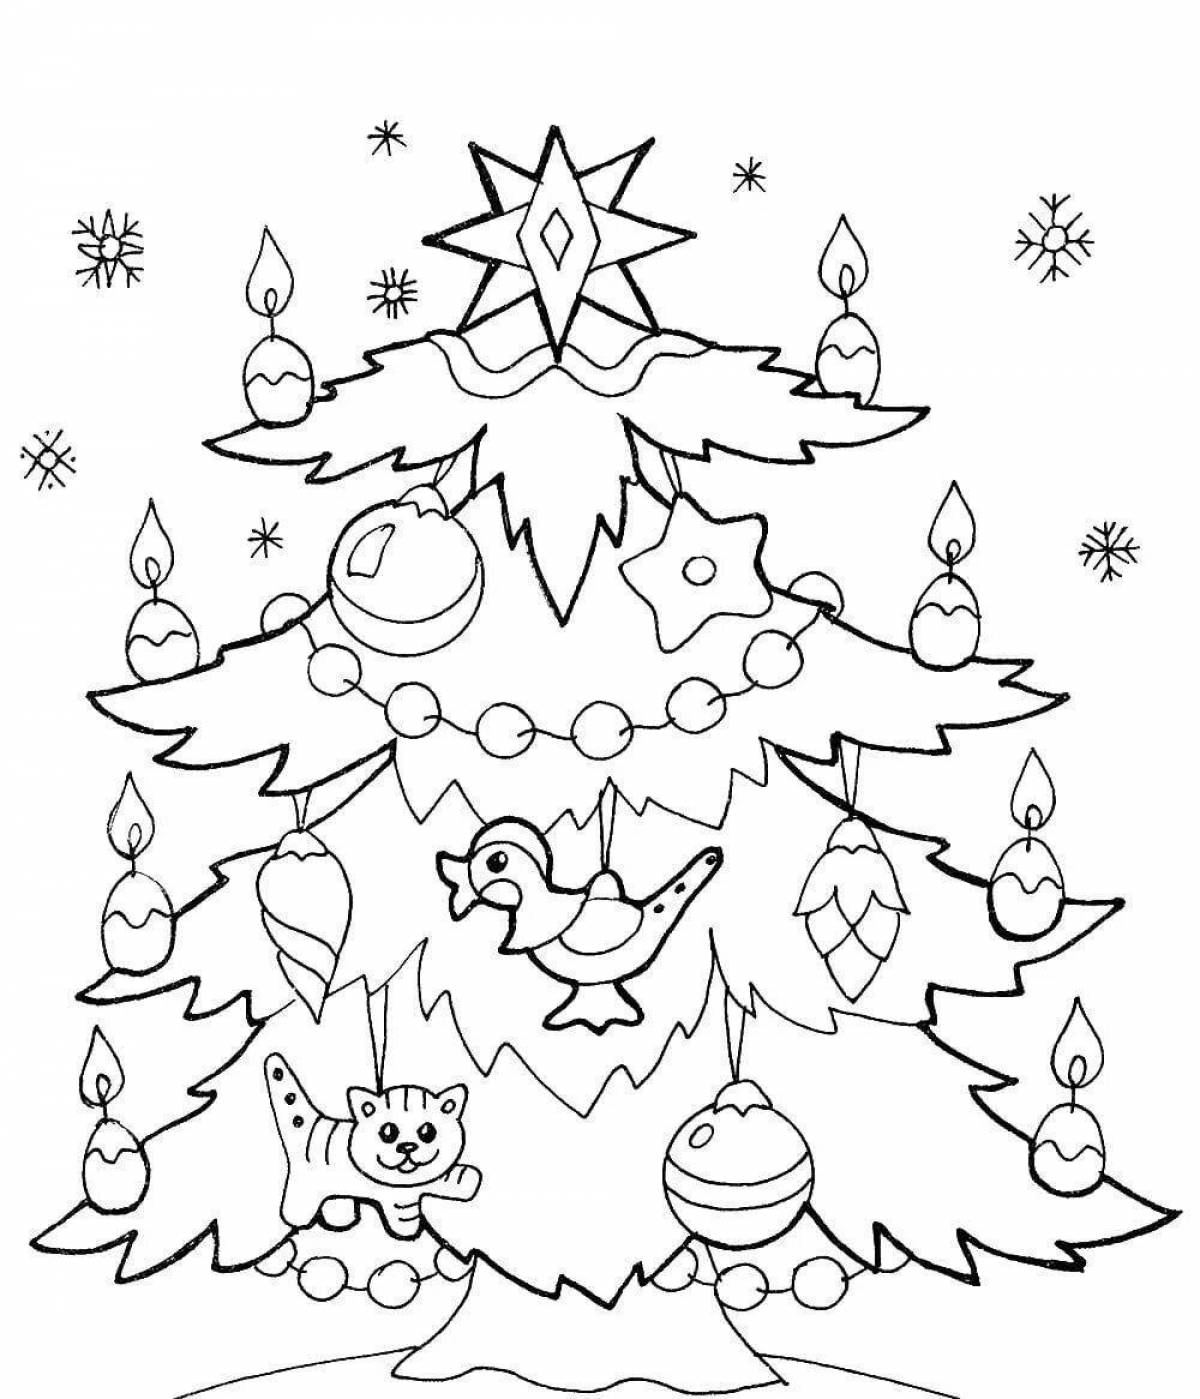 Cute Christmas tree coloring book for 6-7 year olds